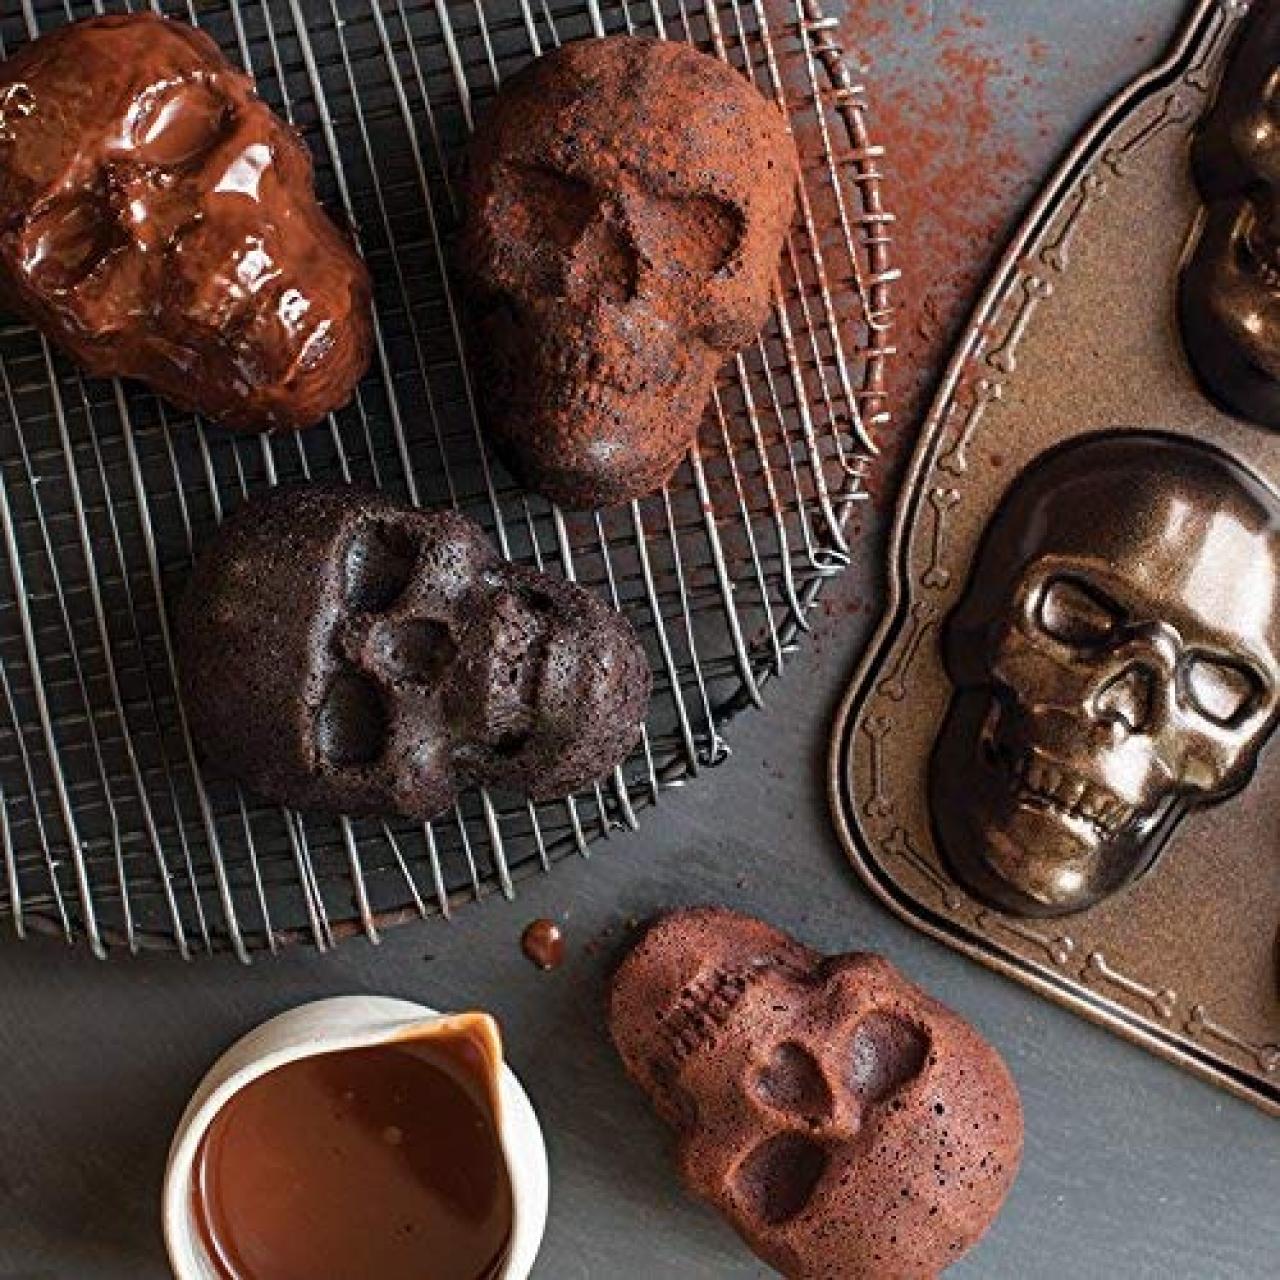 https://food.fnr.sndimg.com/content/dam/images/food/products/2019/10/28/rx_nordic-ware-haunted-skull-cakelet-pan.jpeg.rend.hgtvcom.1280.1280.suffix/1572297514428.jpeg